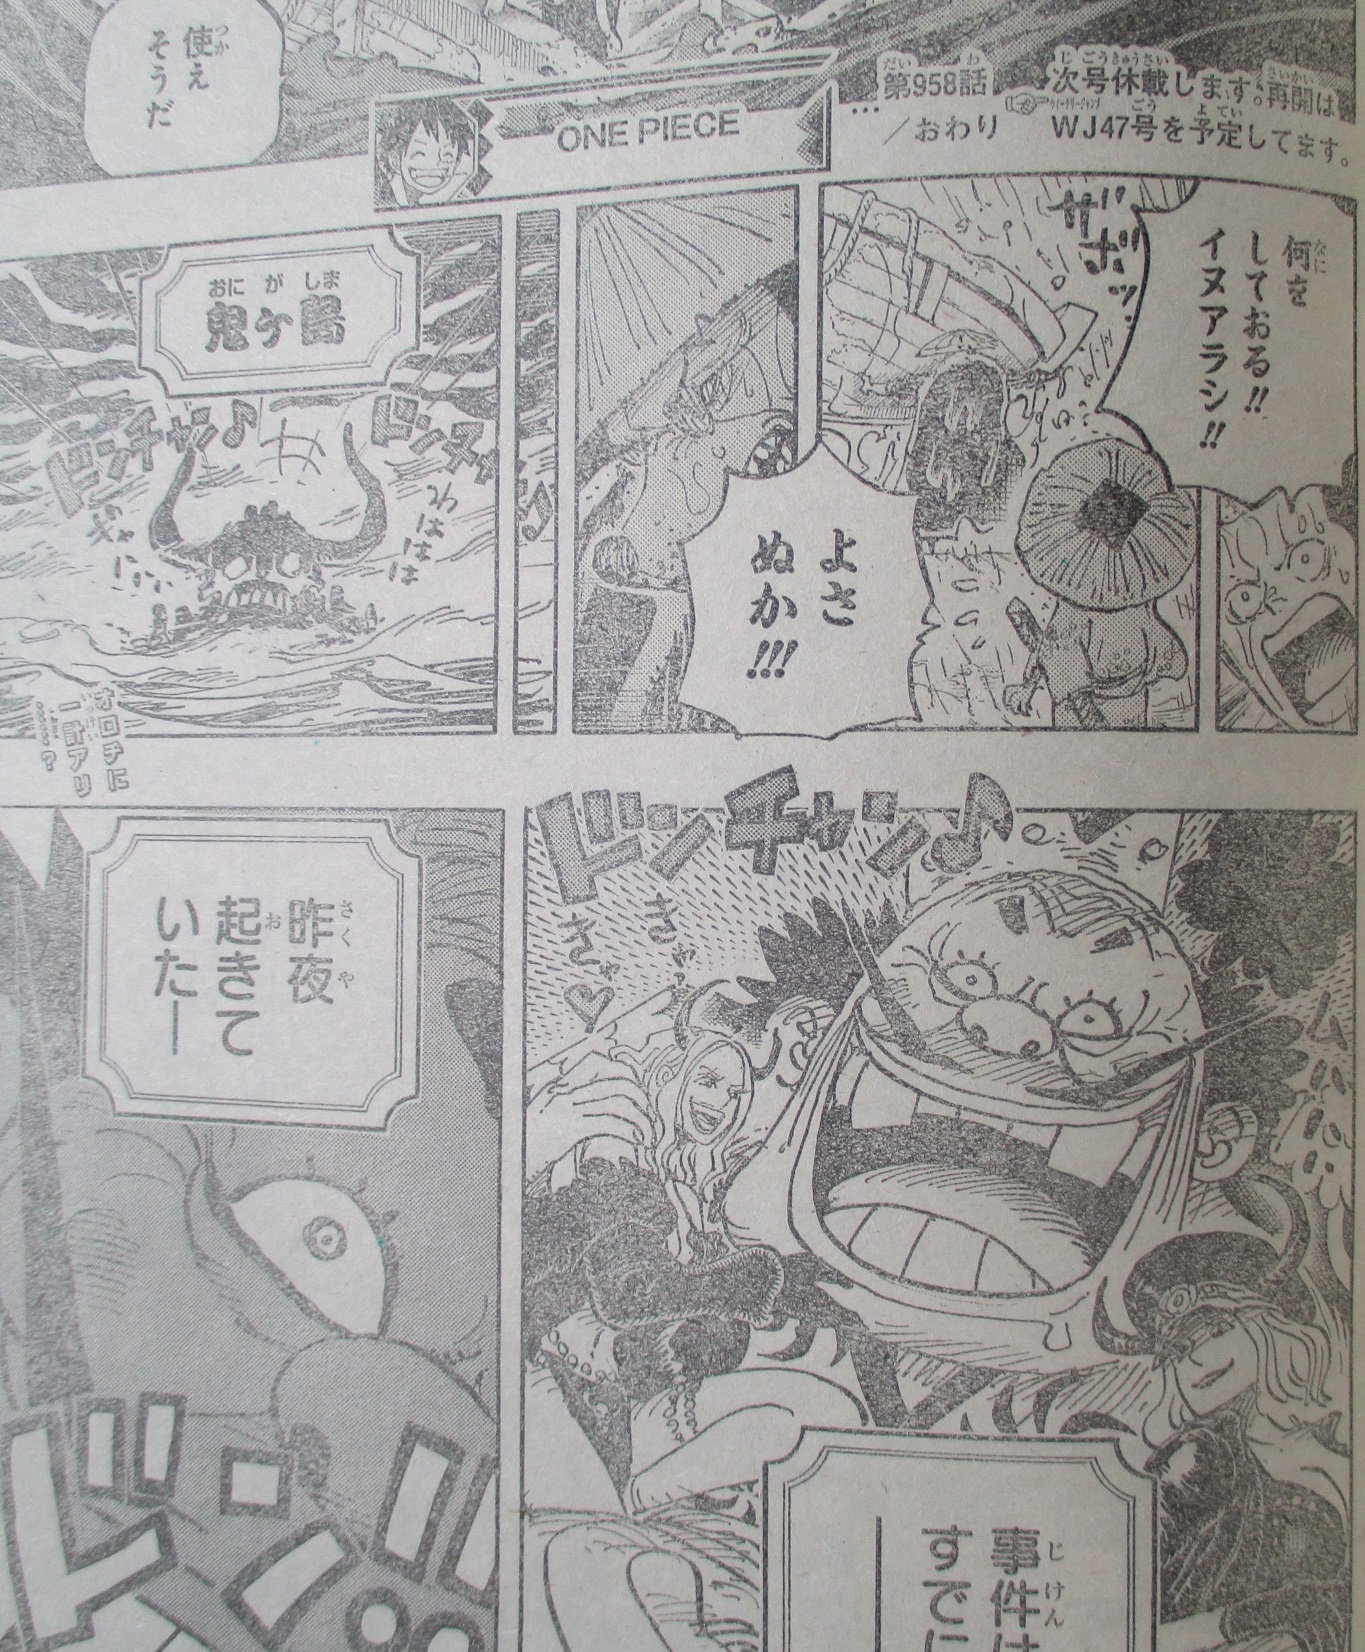 One Piece 959 Spoilers Chapter 959 Review